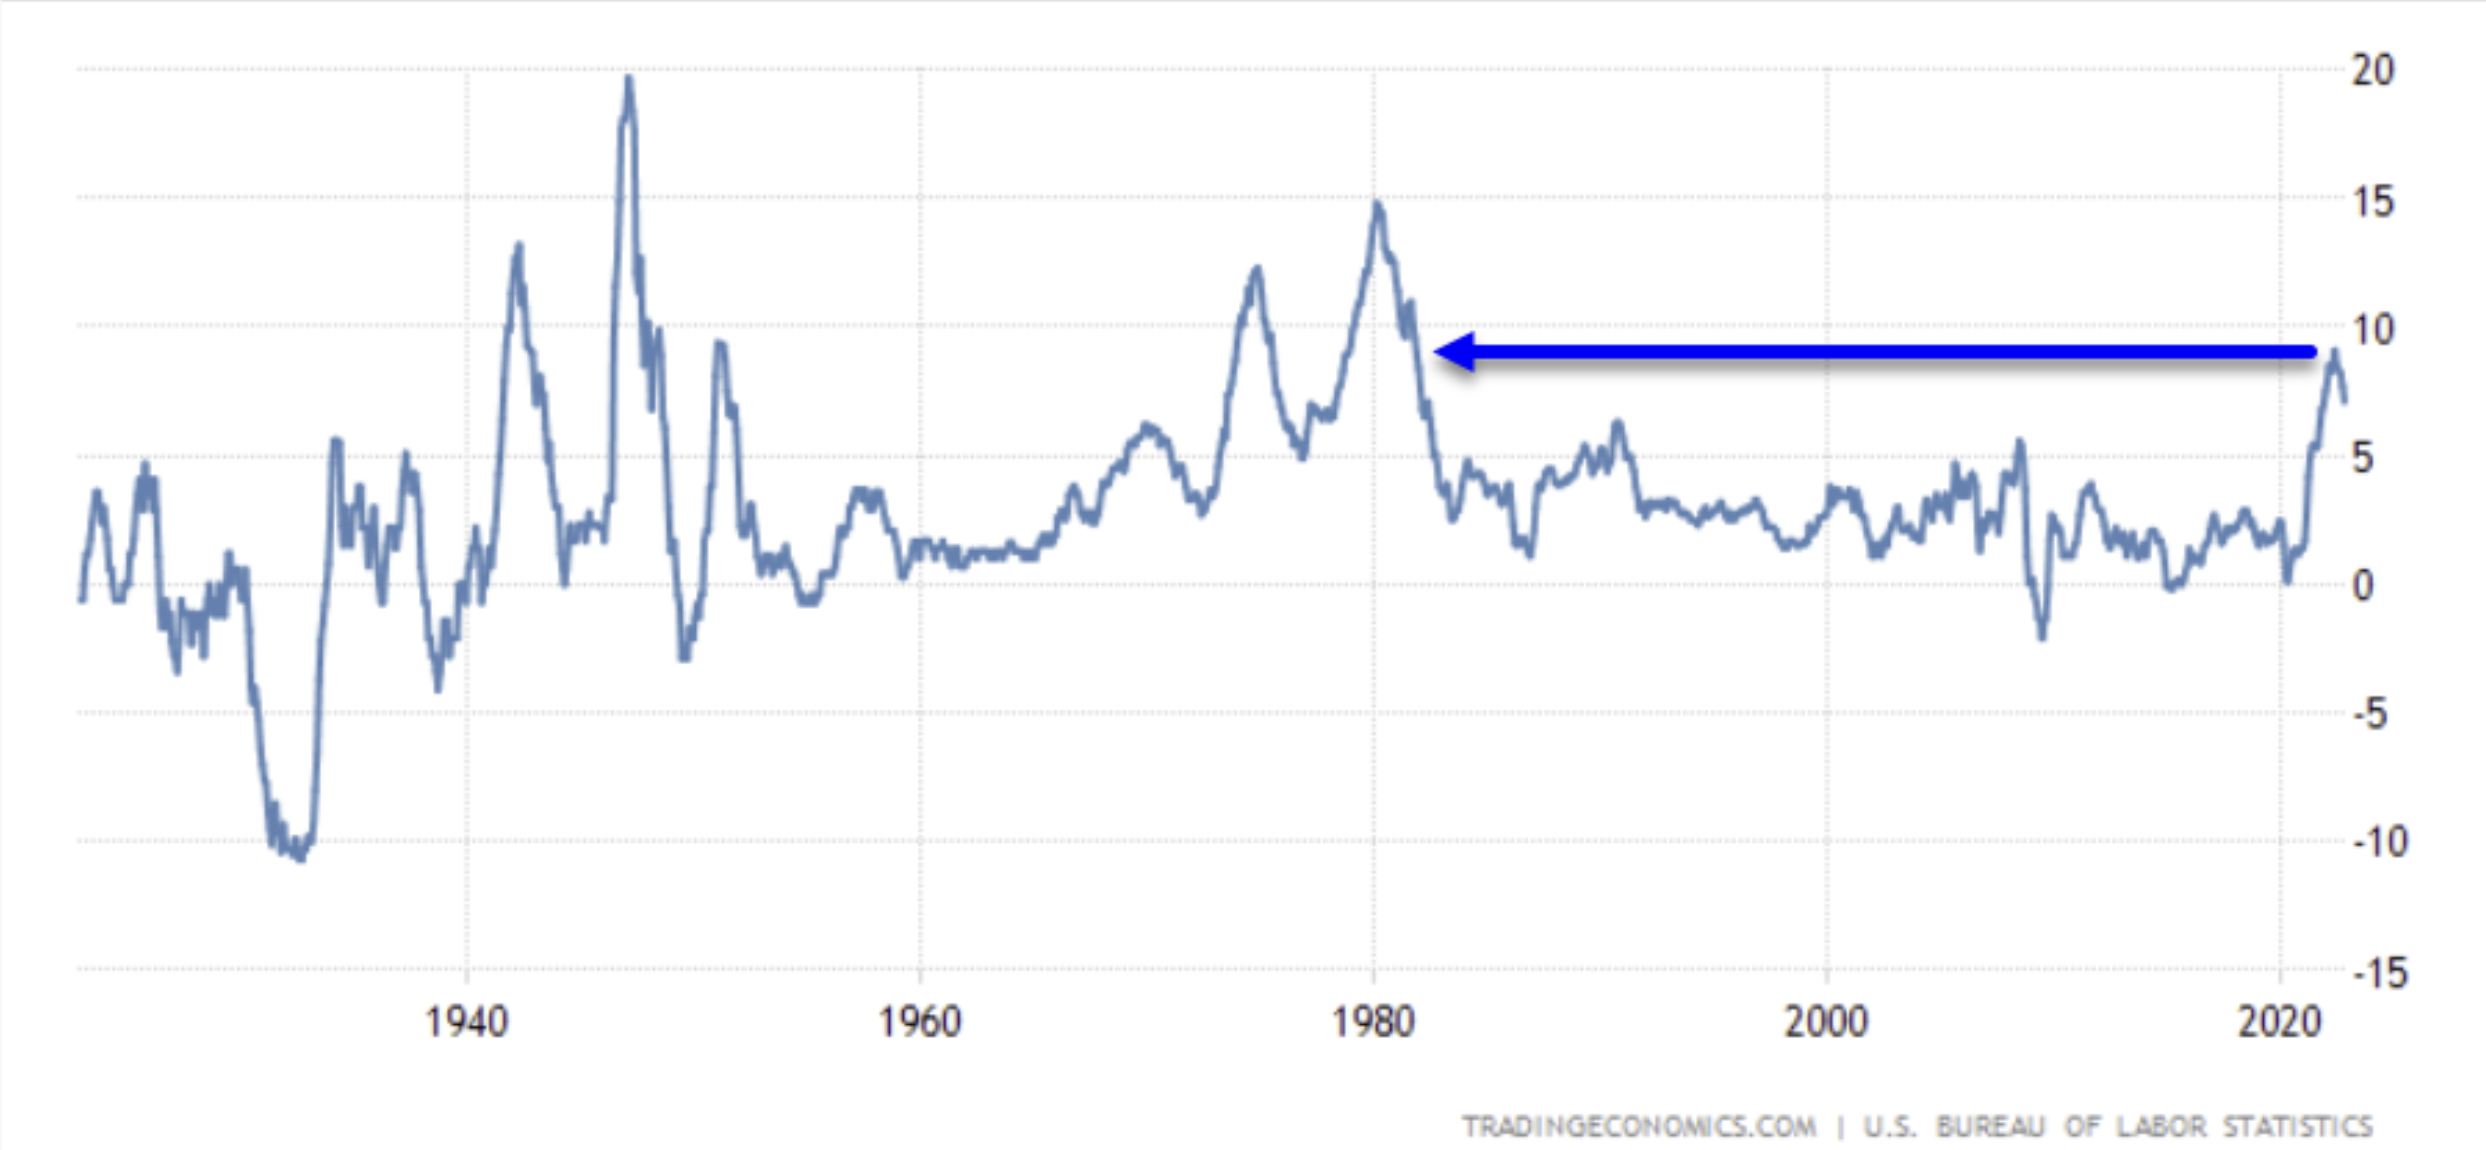 Inflation levels over the last 40 years.